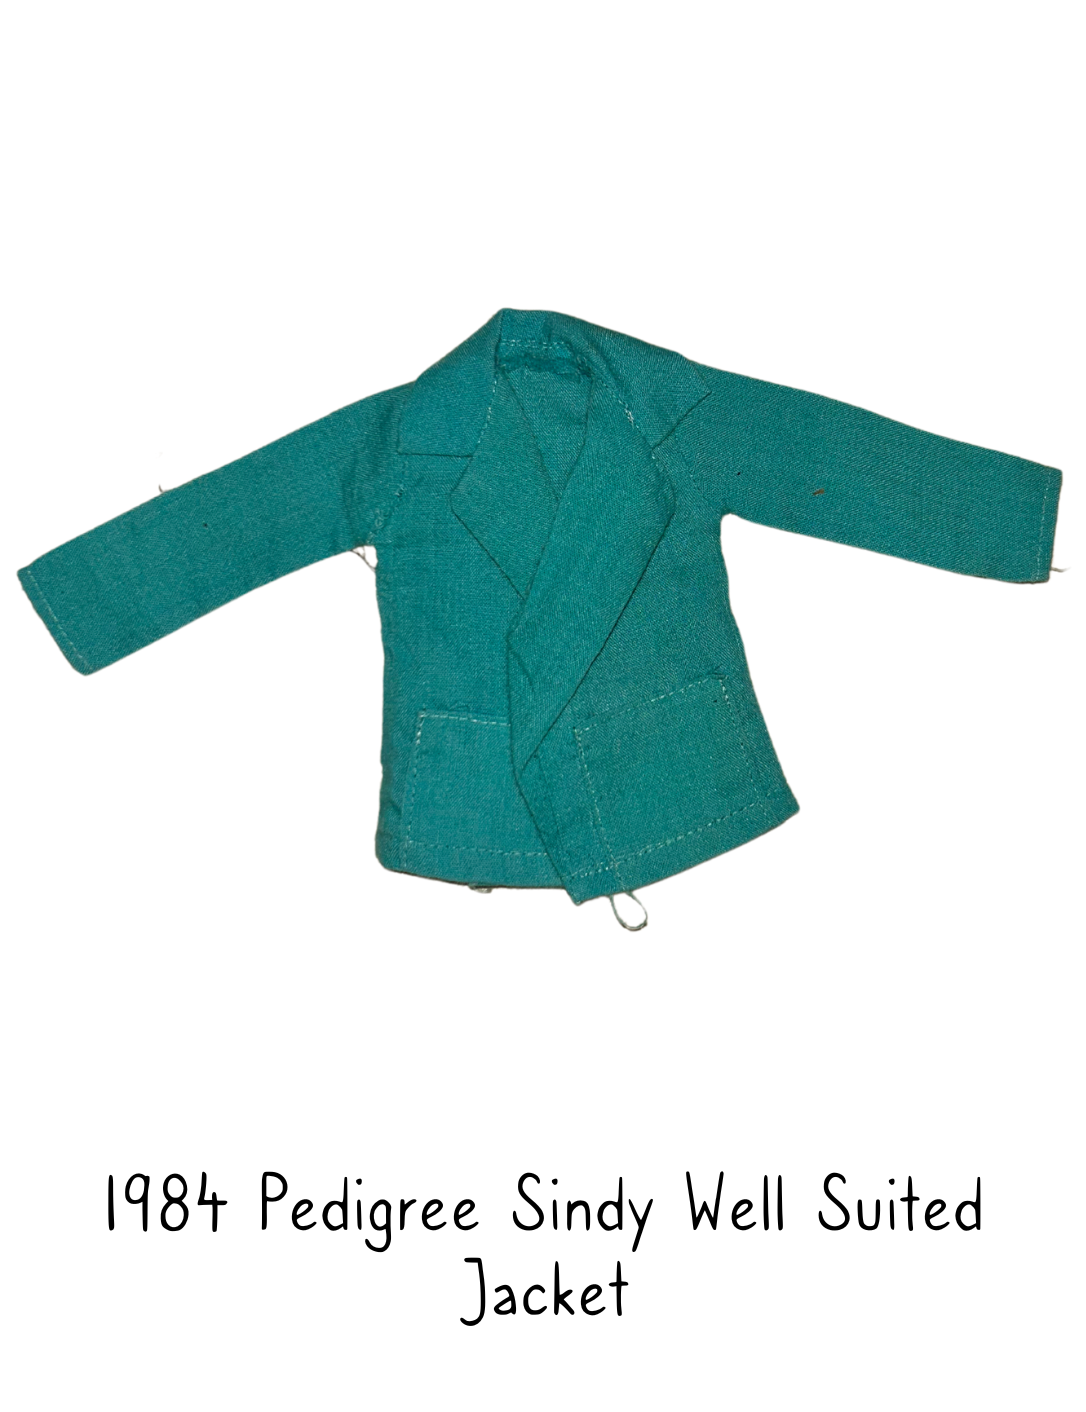 1984 Pedigree Sindy Fashion Doll Well Suited Green Jacket